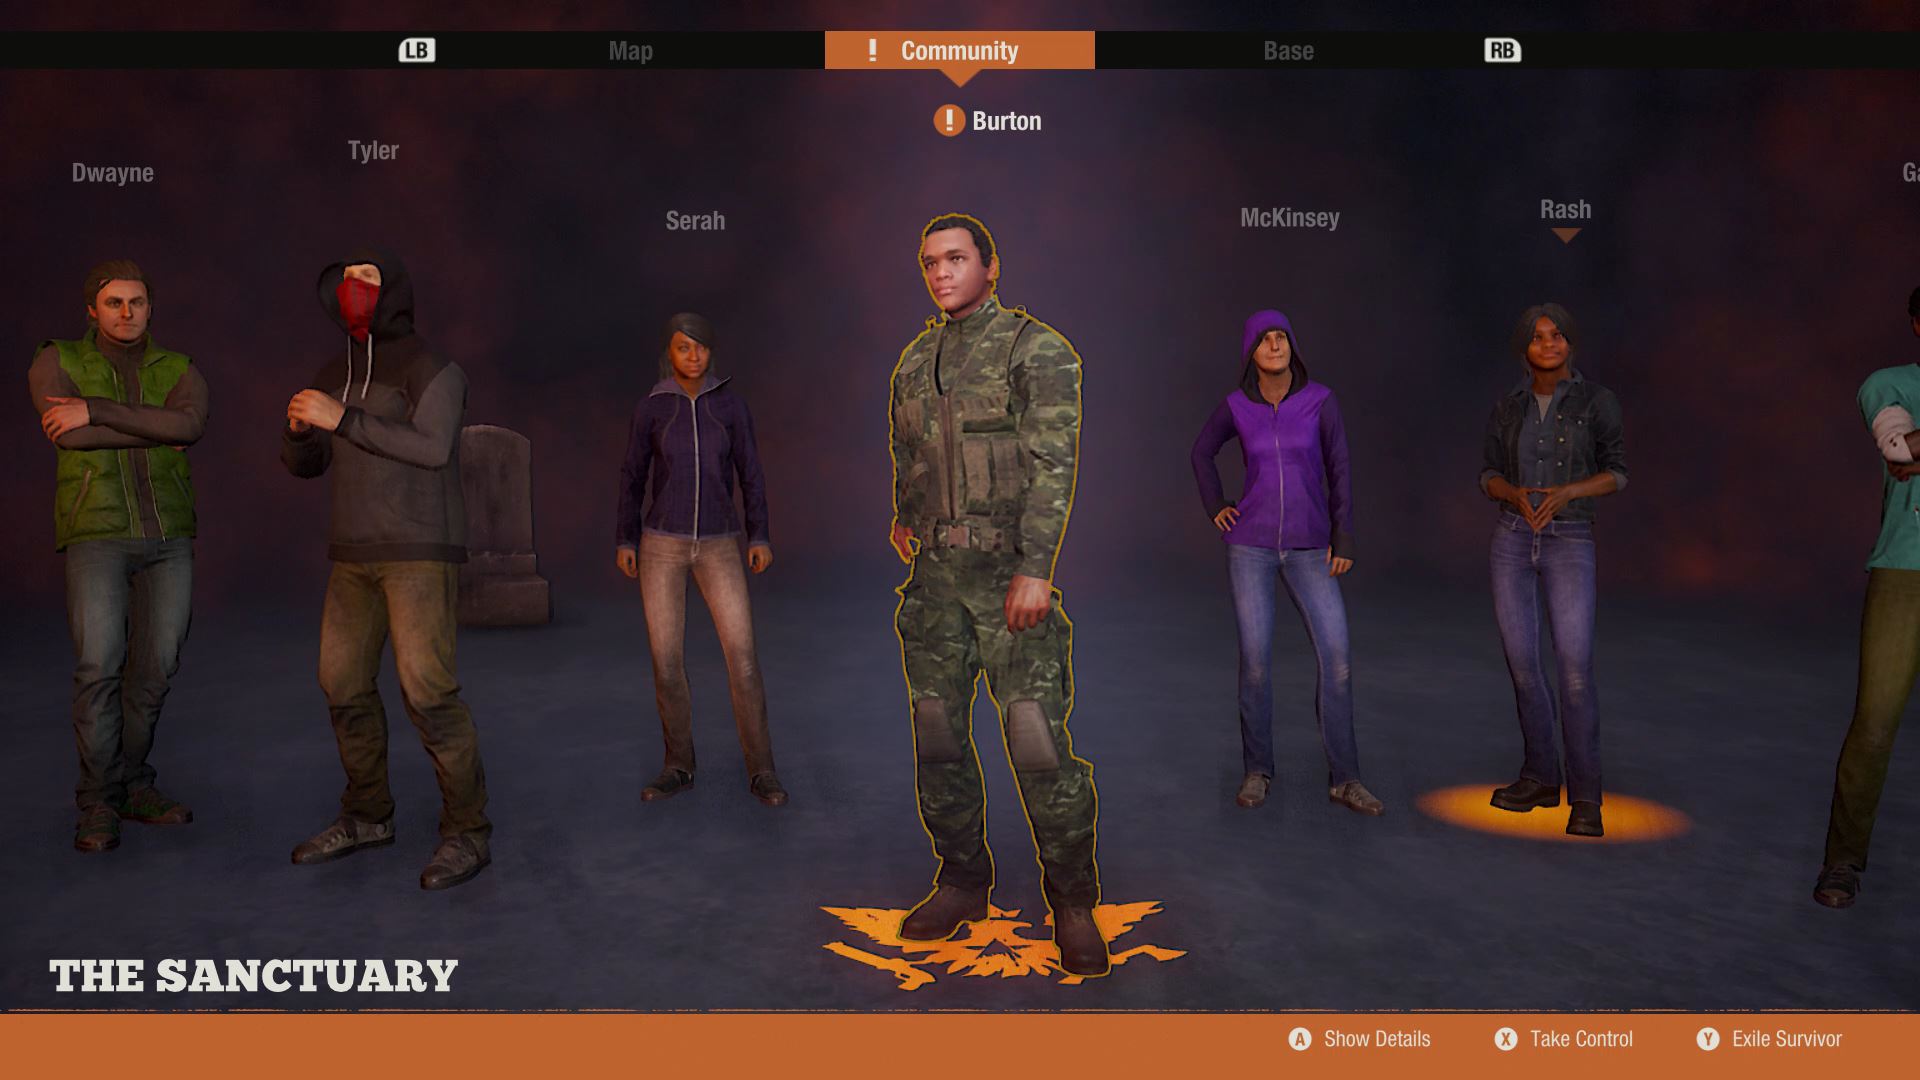 State of Decay 2 - Game Overview